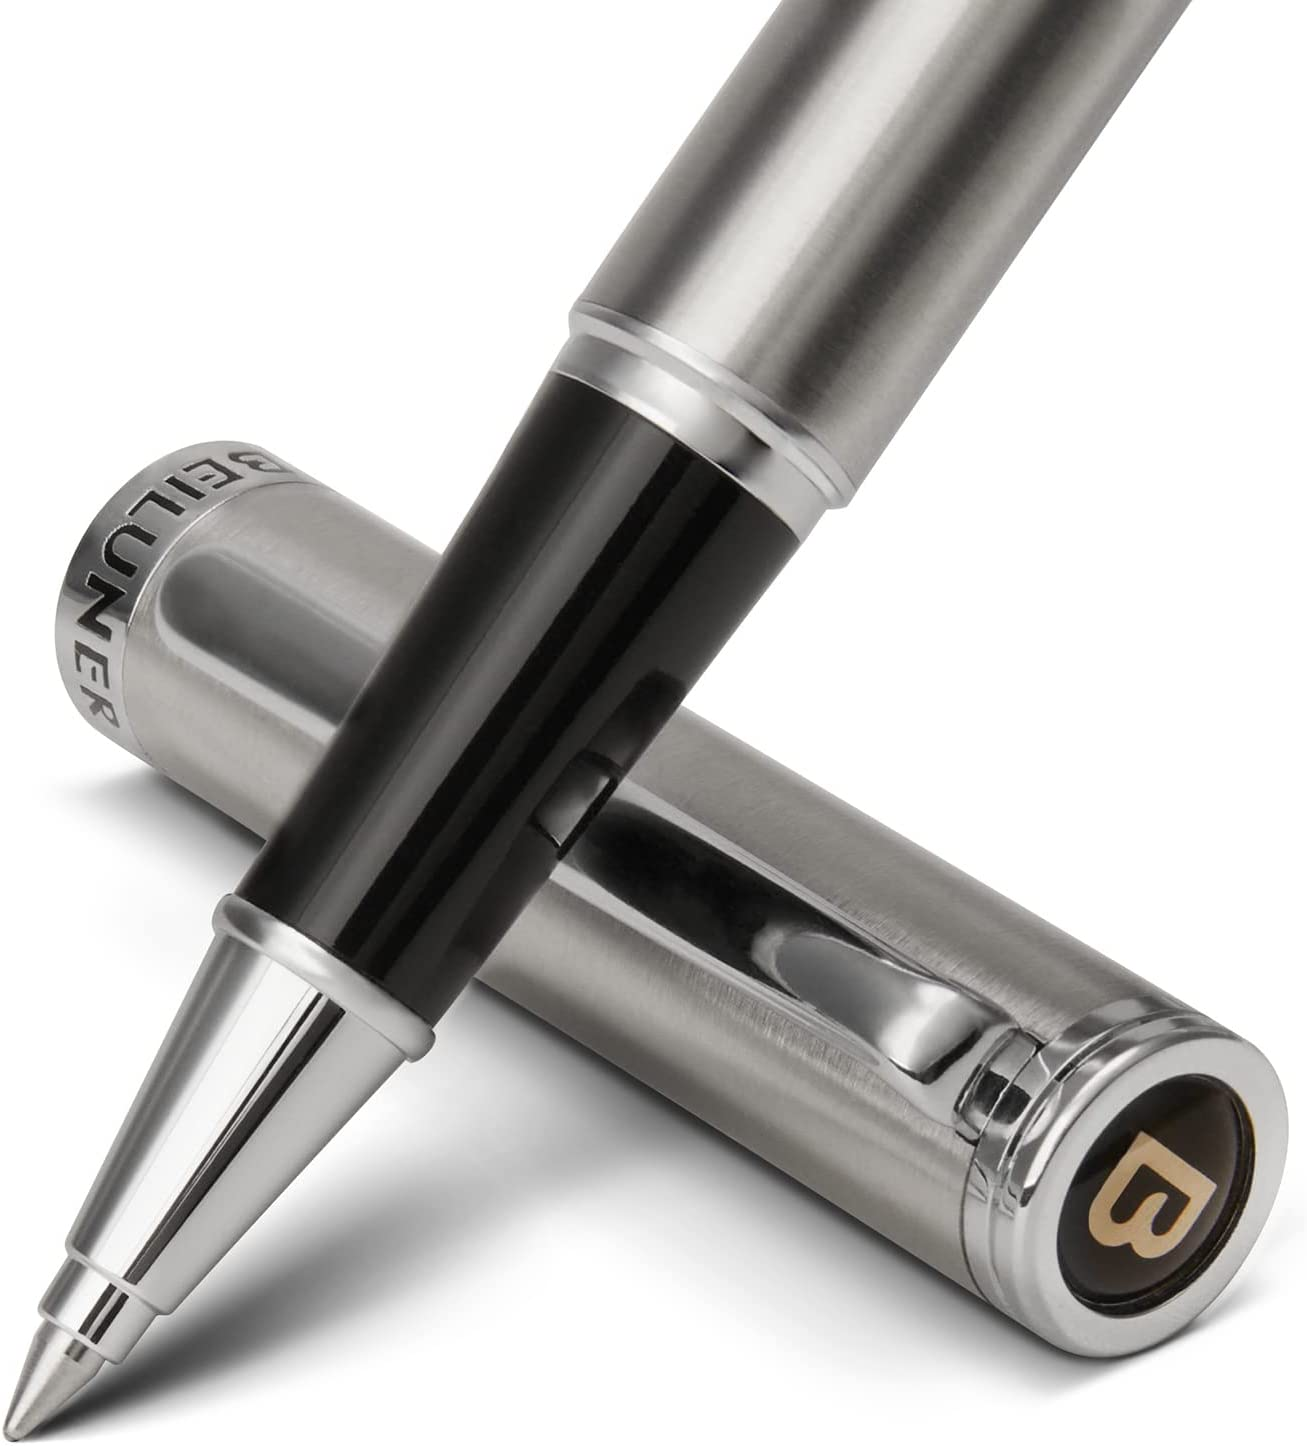 BEILUNER Luxury Rollerball Pen, Silver Grey Pen Barrel with Chrome